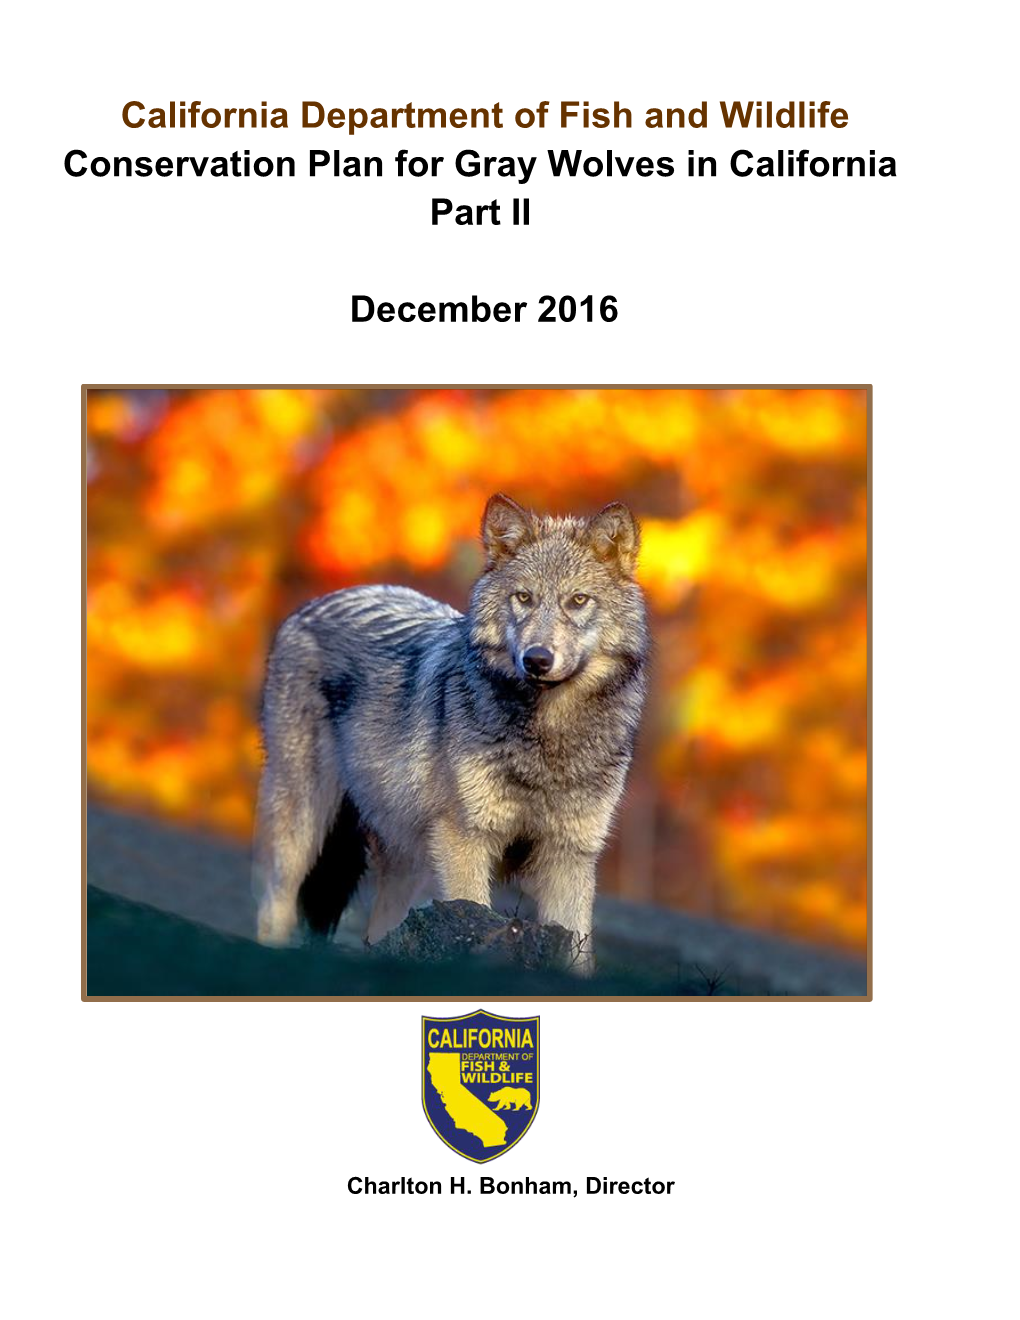 California Department of Fish and Wildlife Conservation Plan for Gray Wolves in California Part II